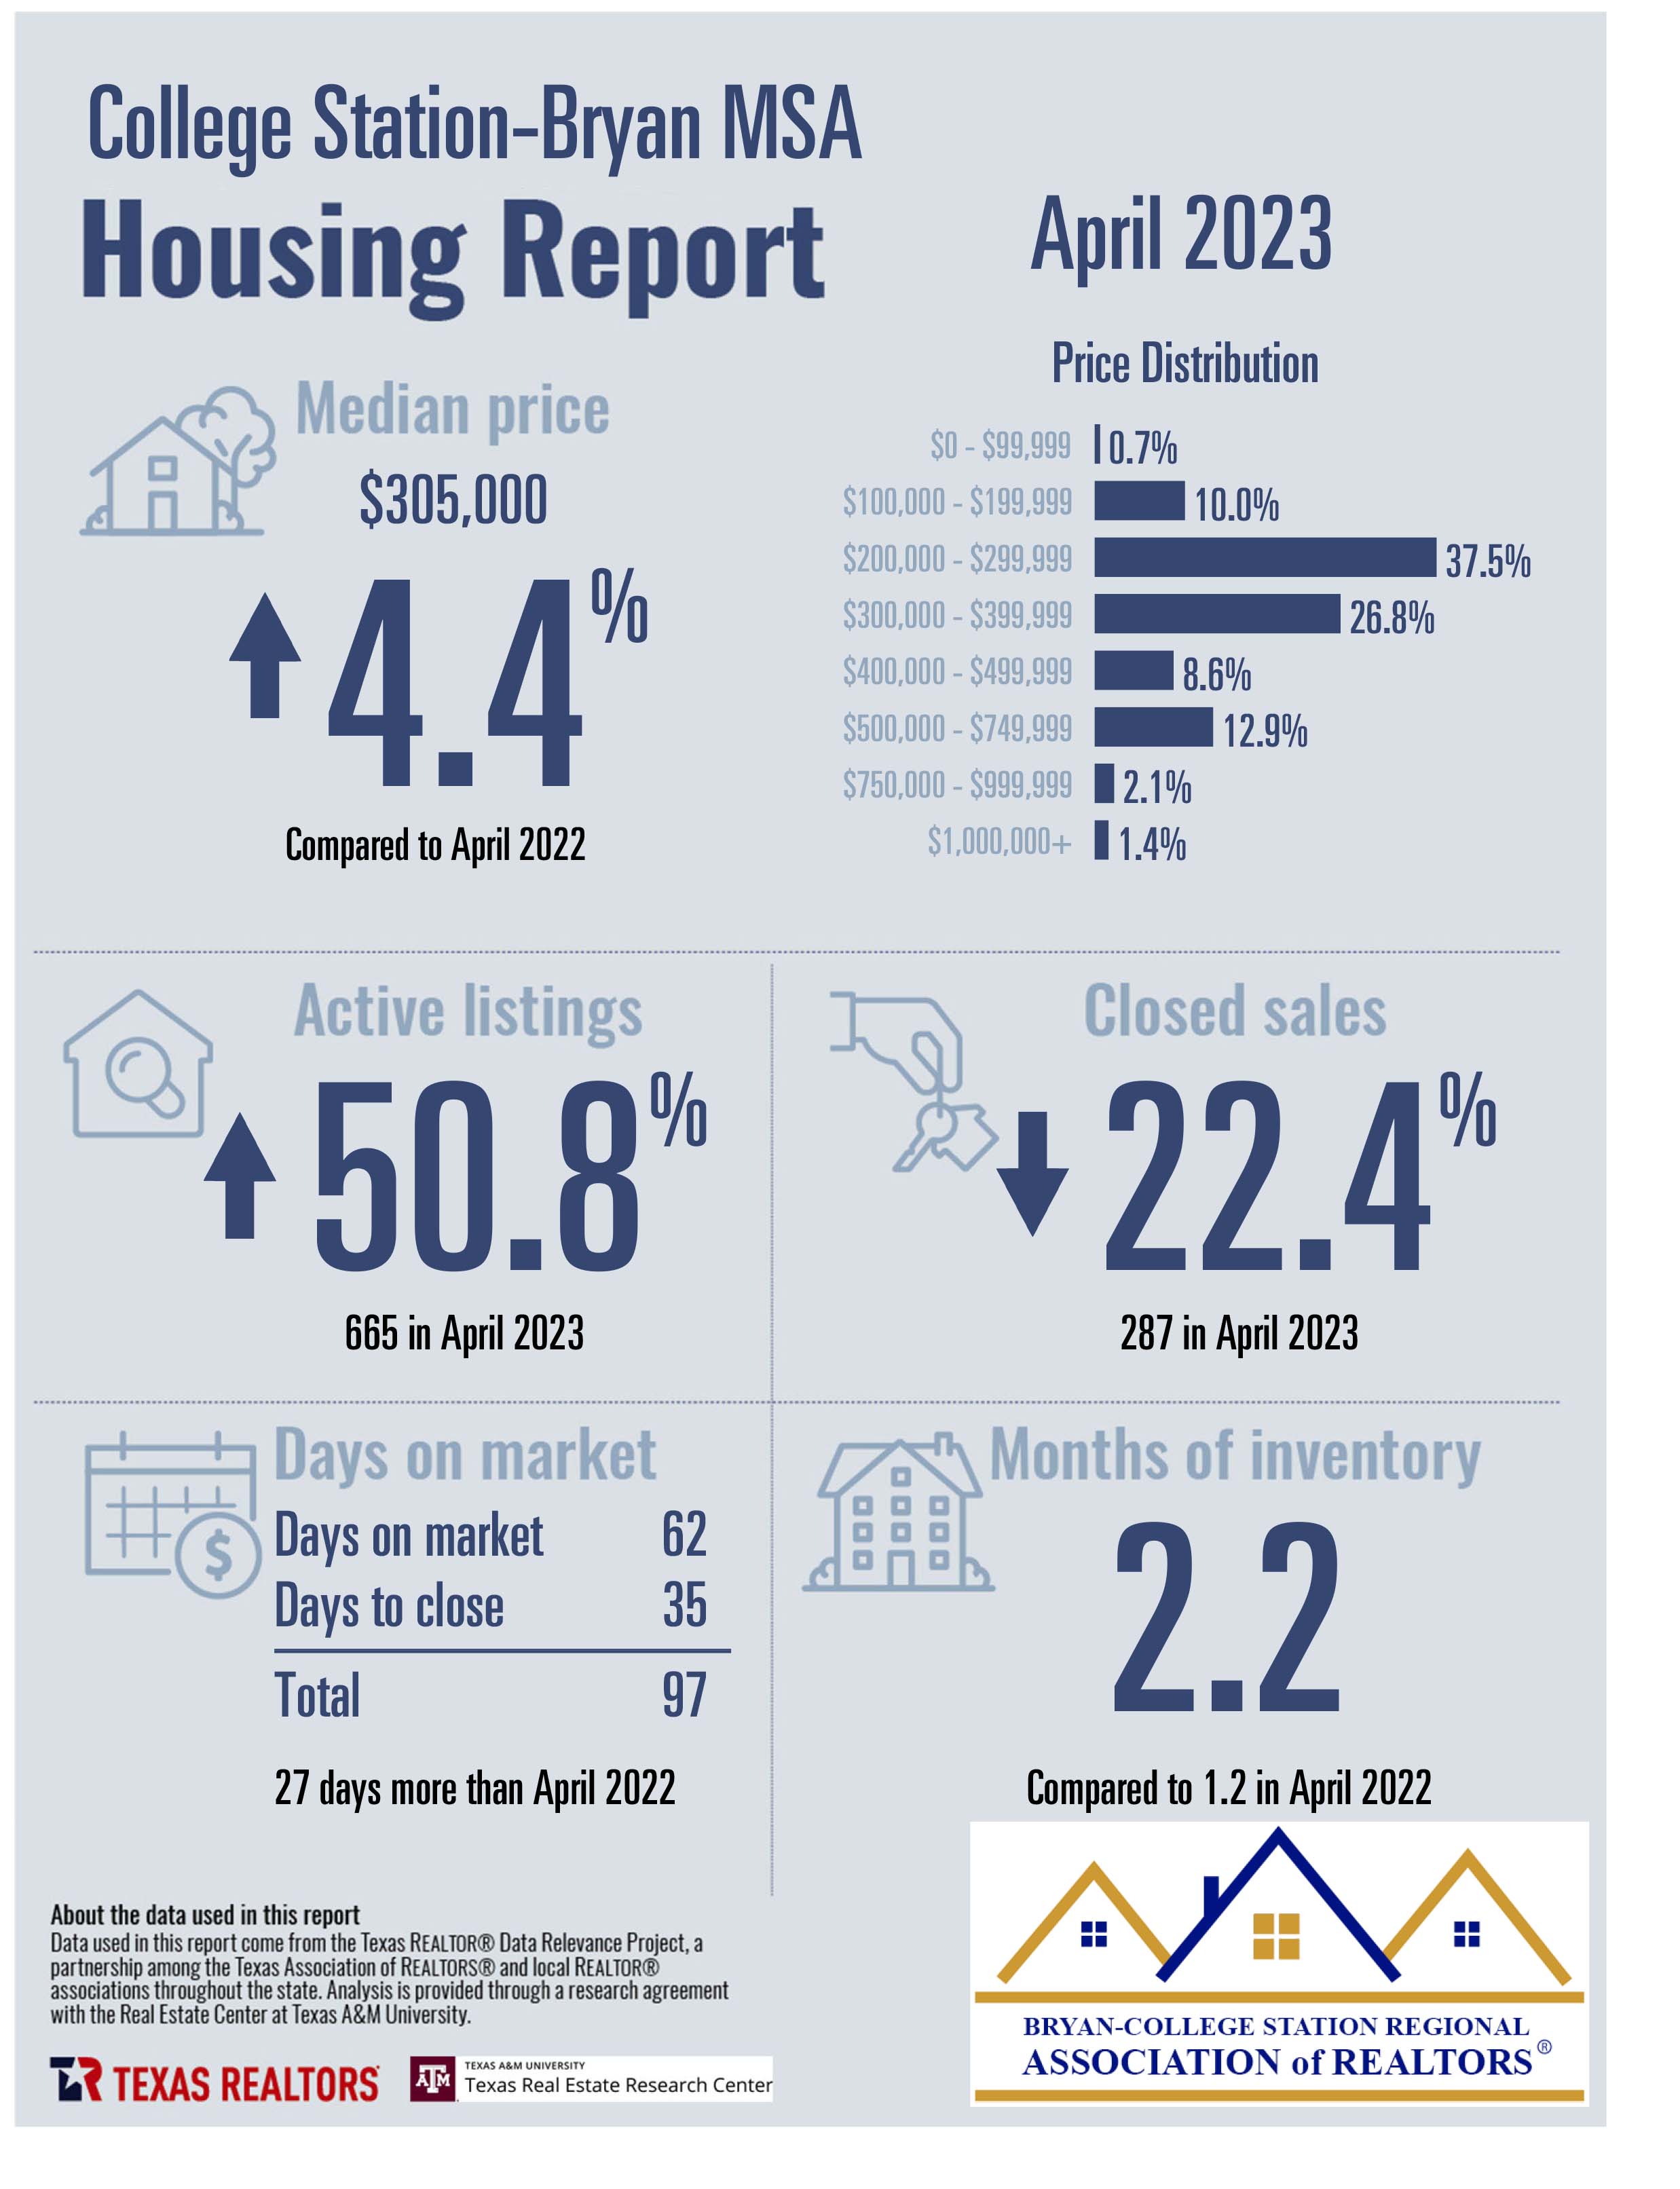 Residential Home Sale Report april 2023 - College Station